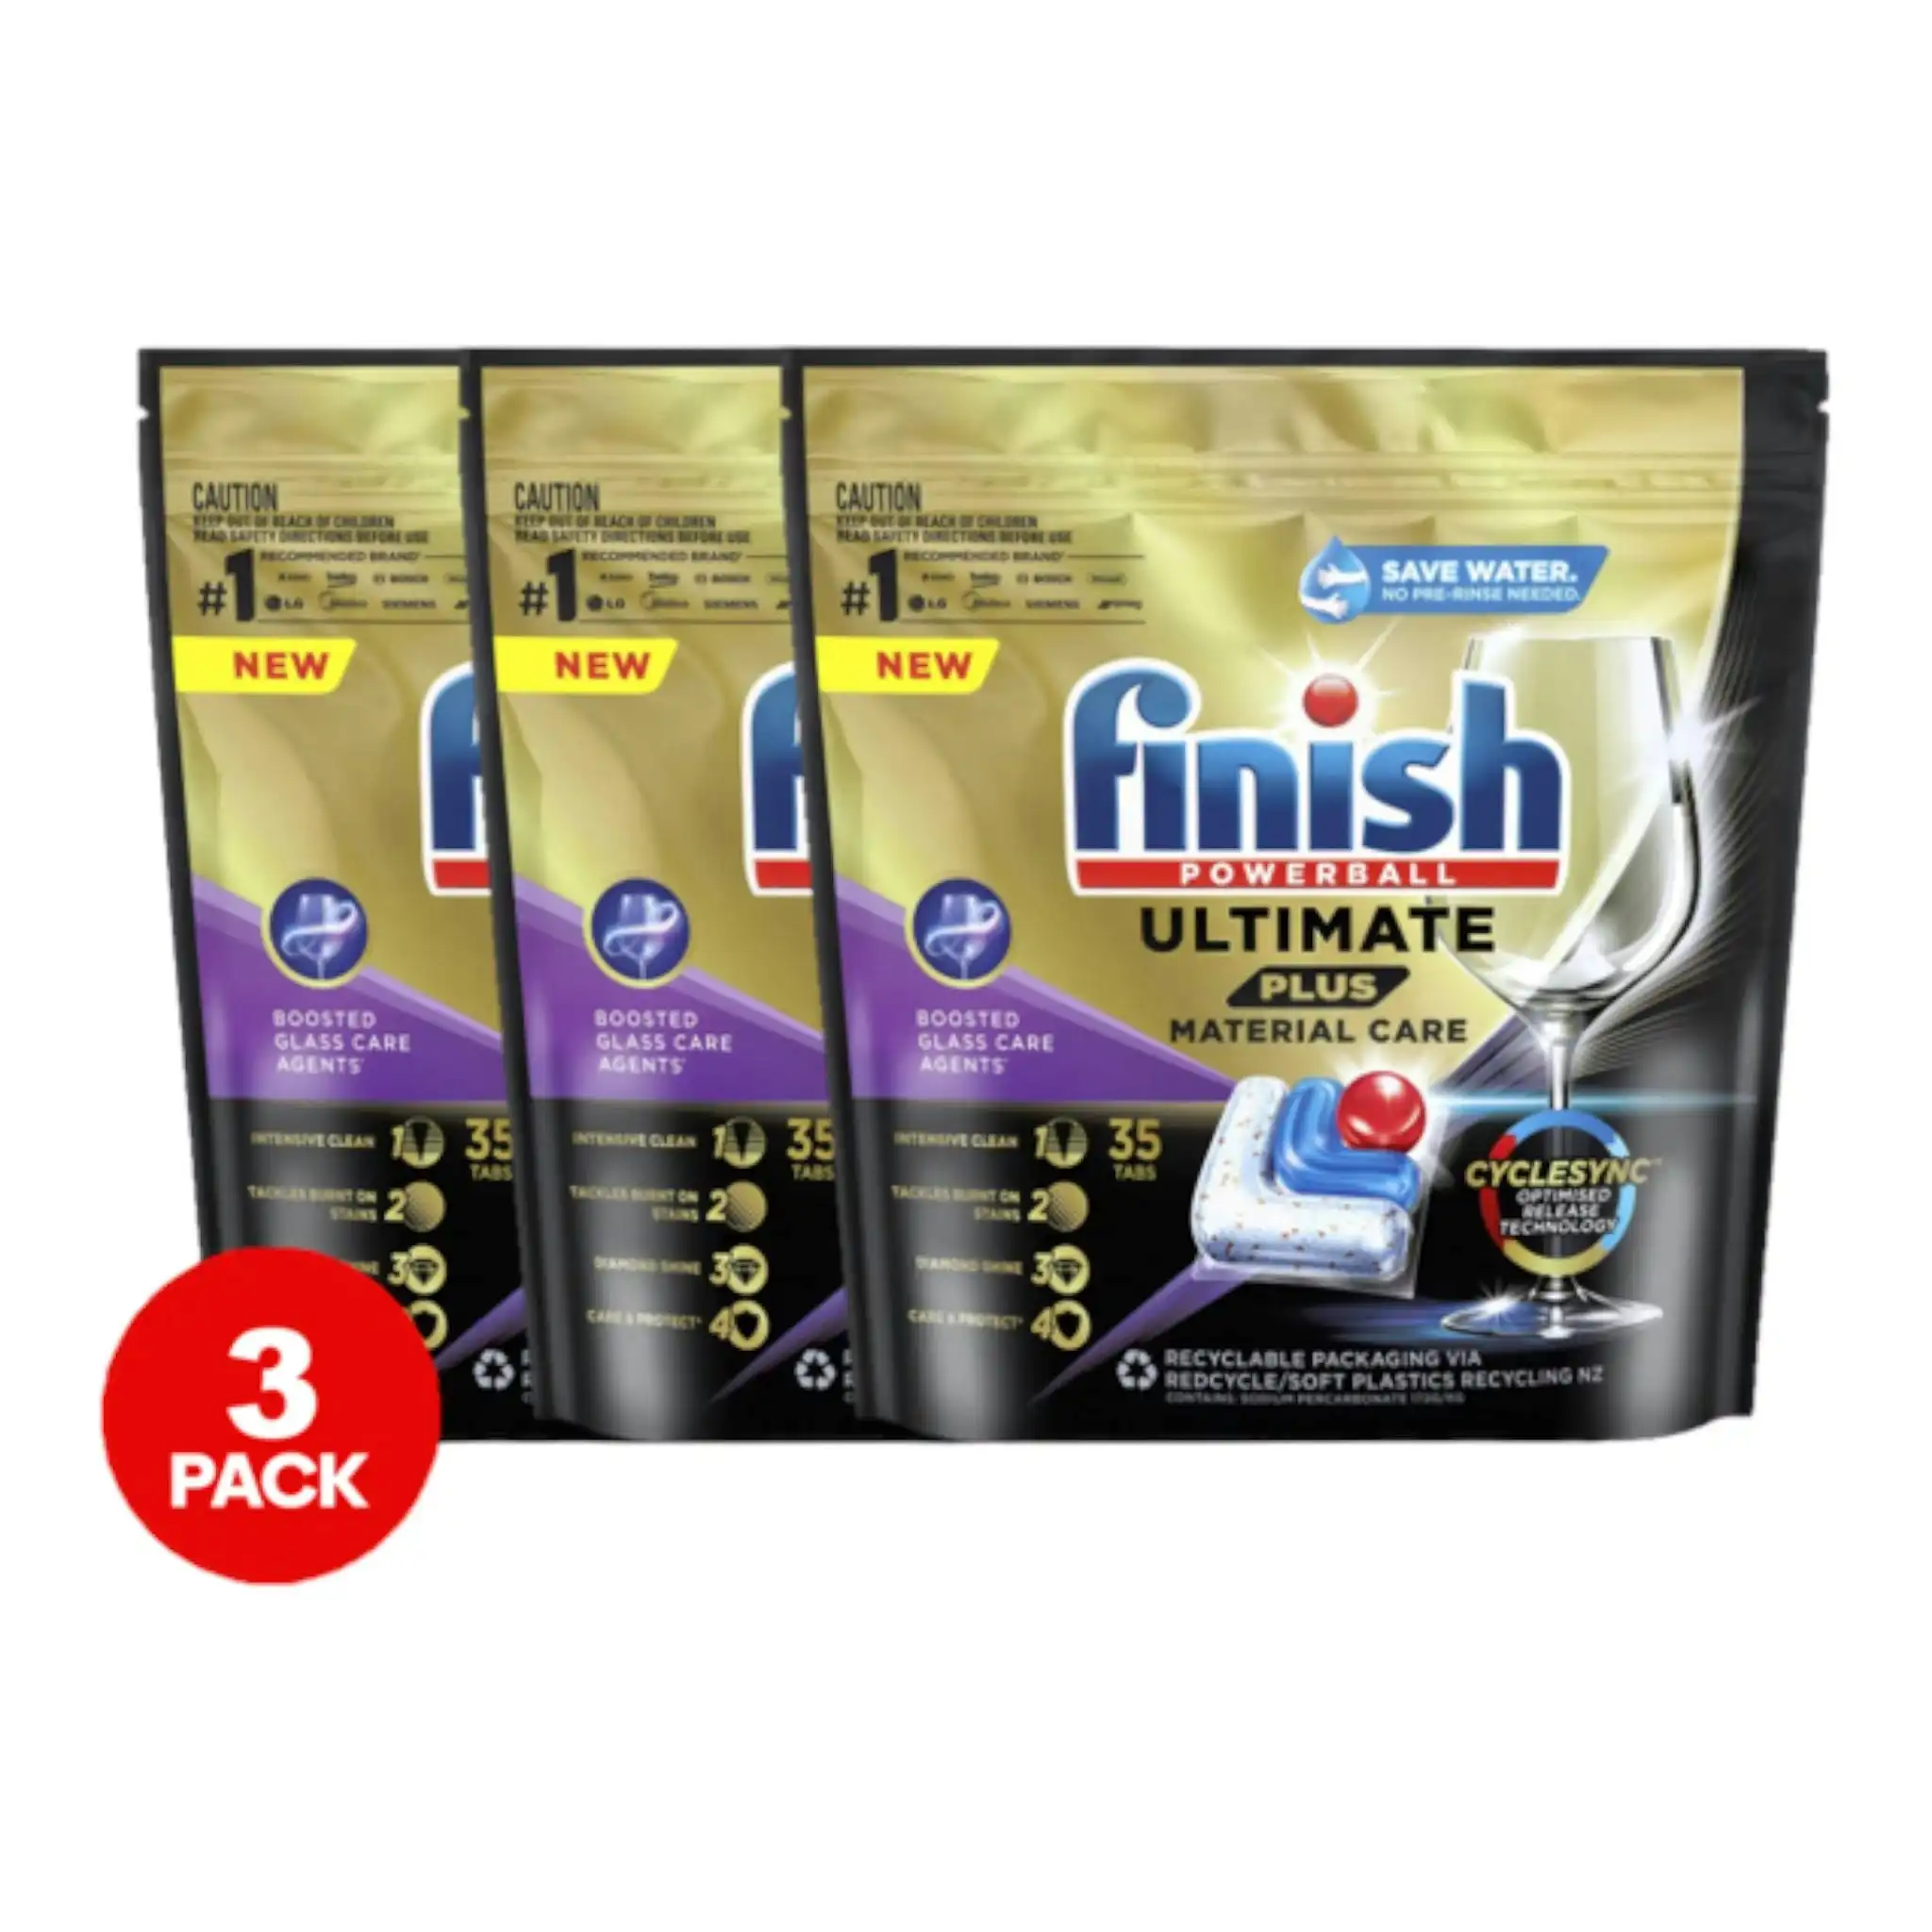 3 x Finish Ultimate Plus Material Care Dishwasher Tablets 35 Pack